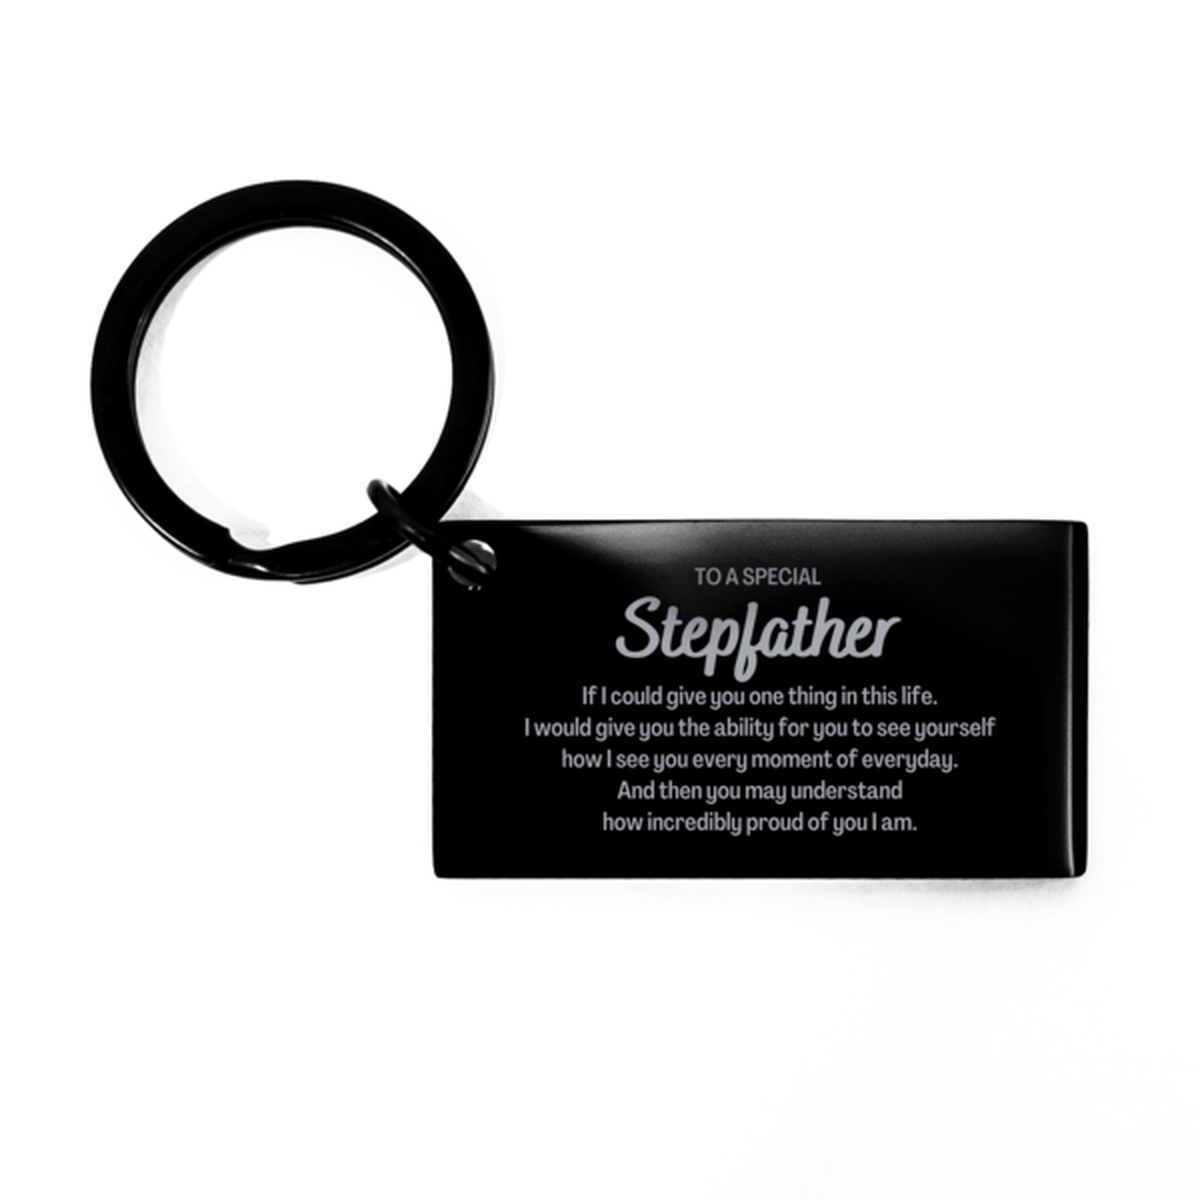 To My Stepfather Keychain, Gifts For Stepfather Engraved, Inspirational Gifts for Christmas Birthday, Epic Gifts for Stepfather To A Special Stepfather how incredibly proud of you I am